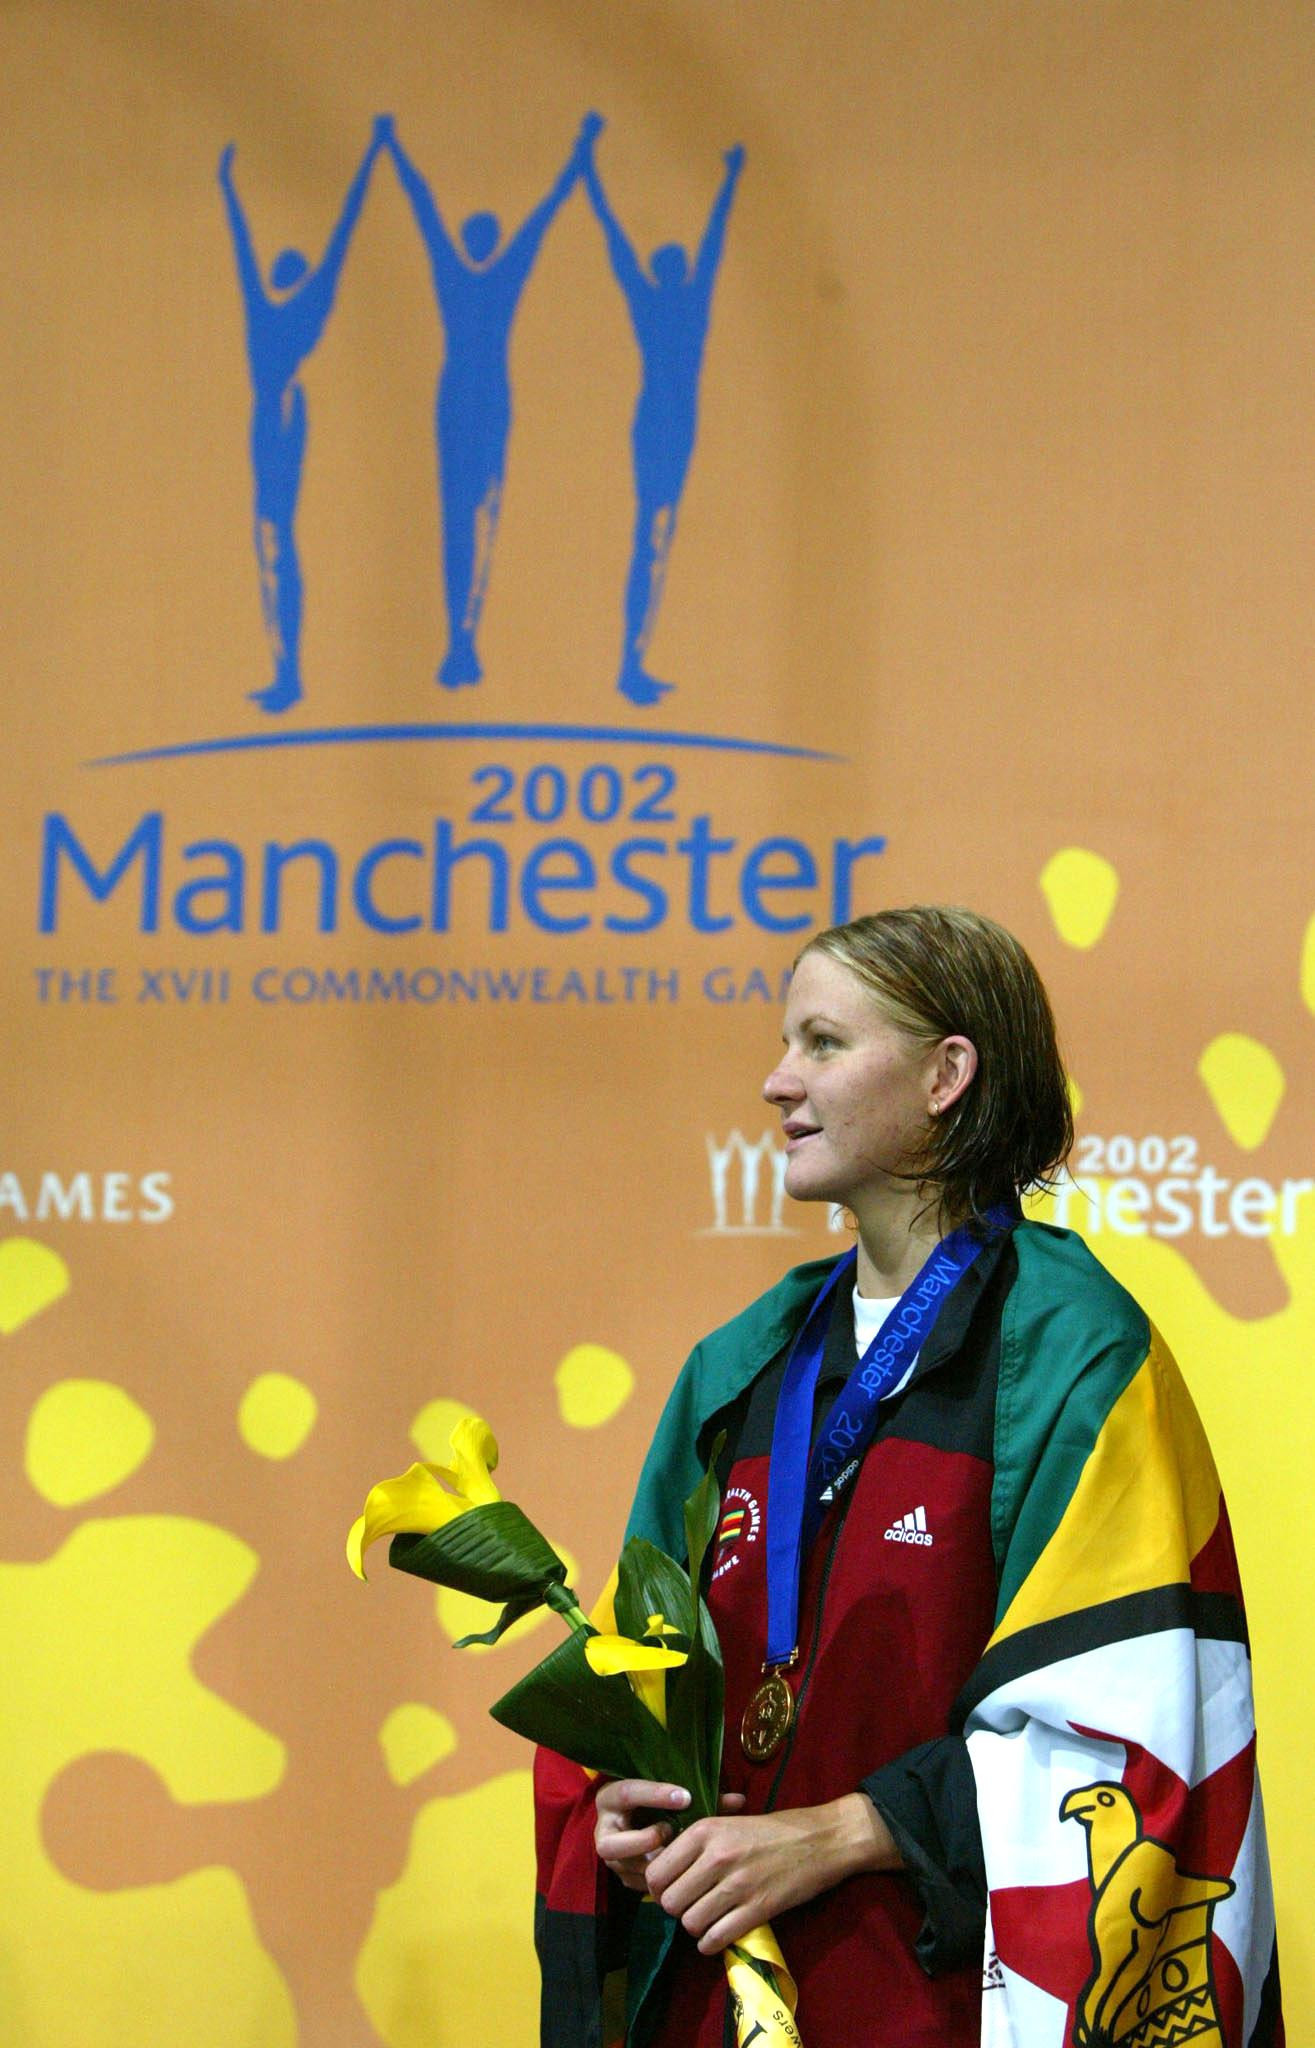 Swimmer Kirsty Coventry won Zimbabwe's last Commonwealth Games gold medal at Manchester 2002 before the country's membership of the Commonwealth was suspended ©Getty Images